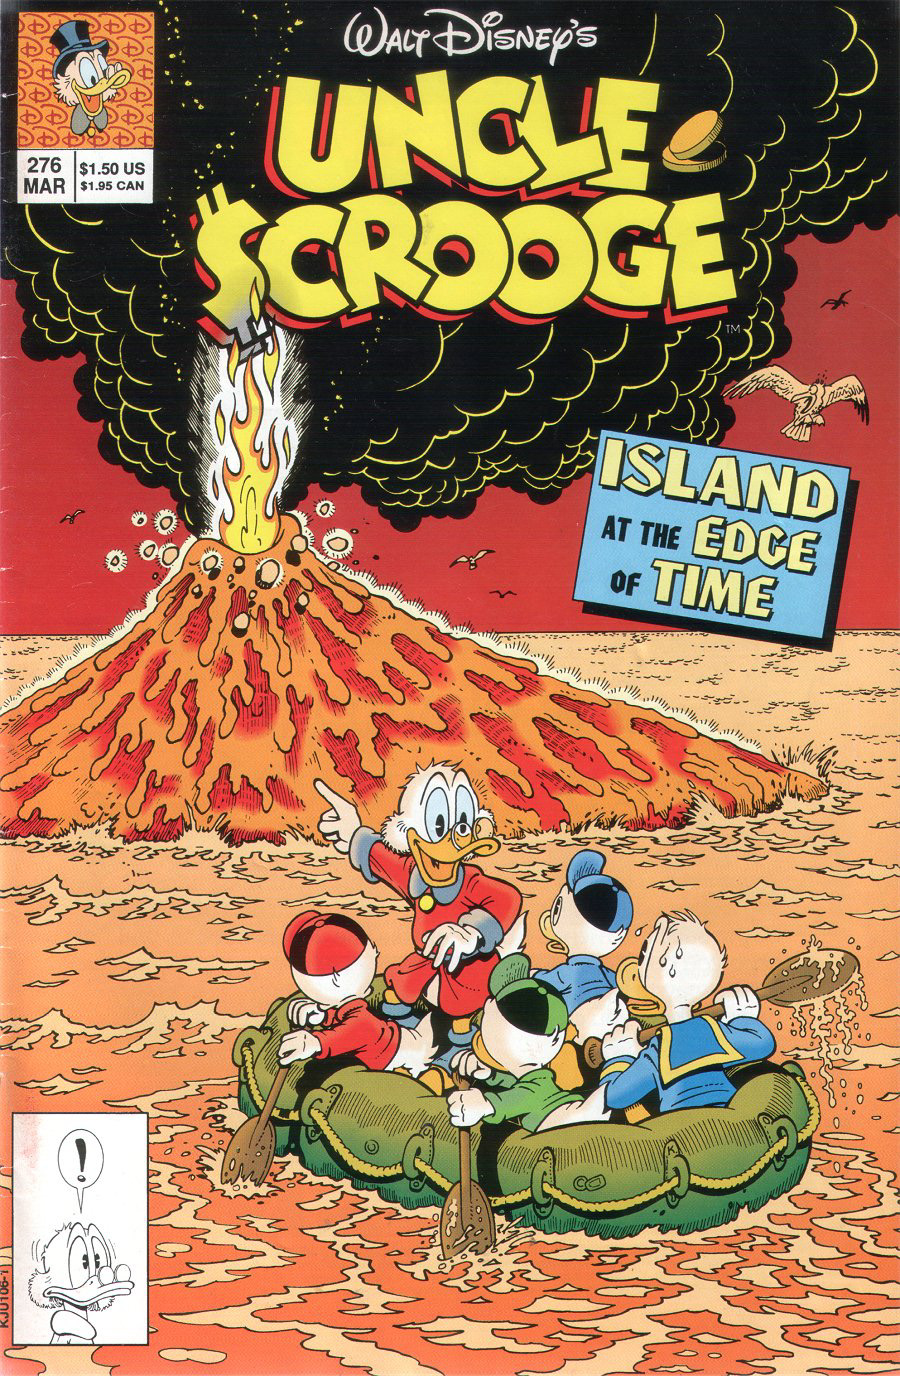 Read online Uncle Scrooge (1953) comic -  Issue #276 - 1